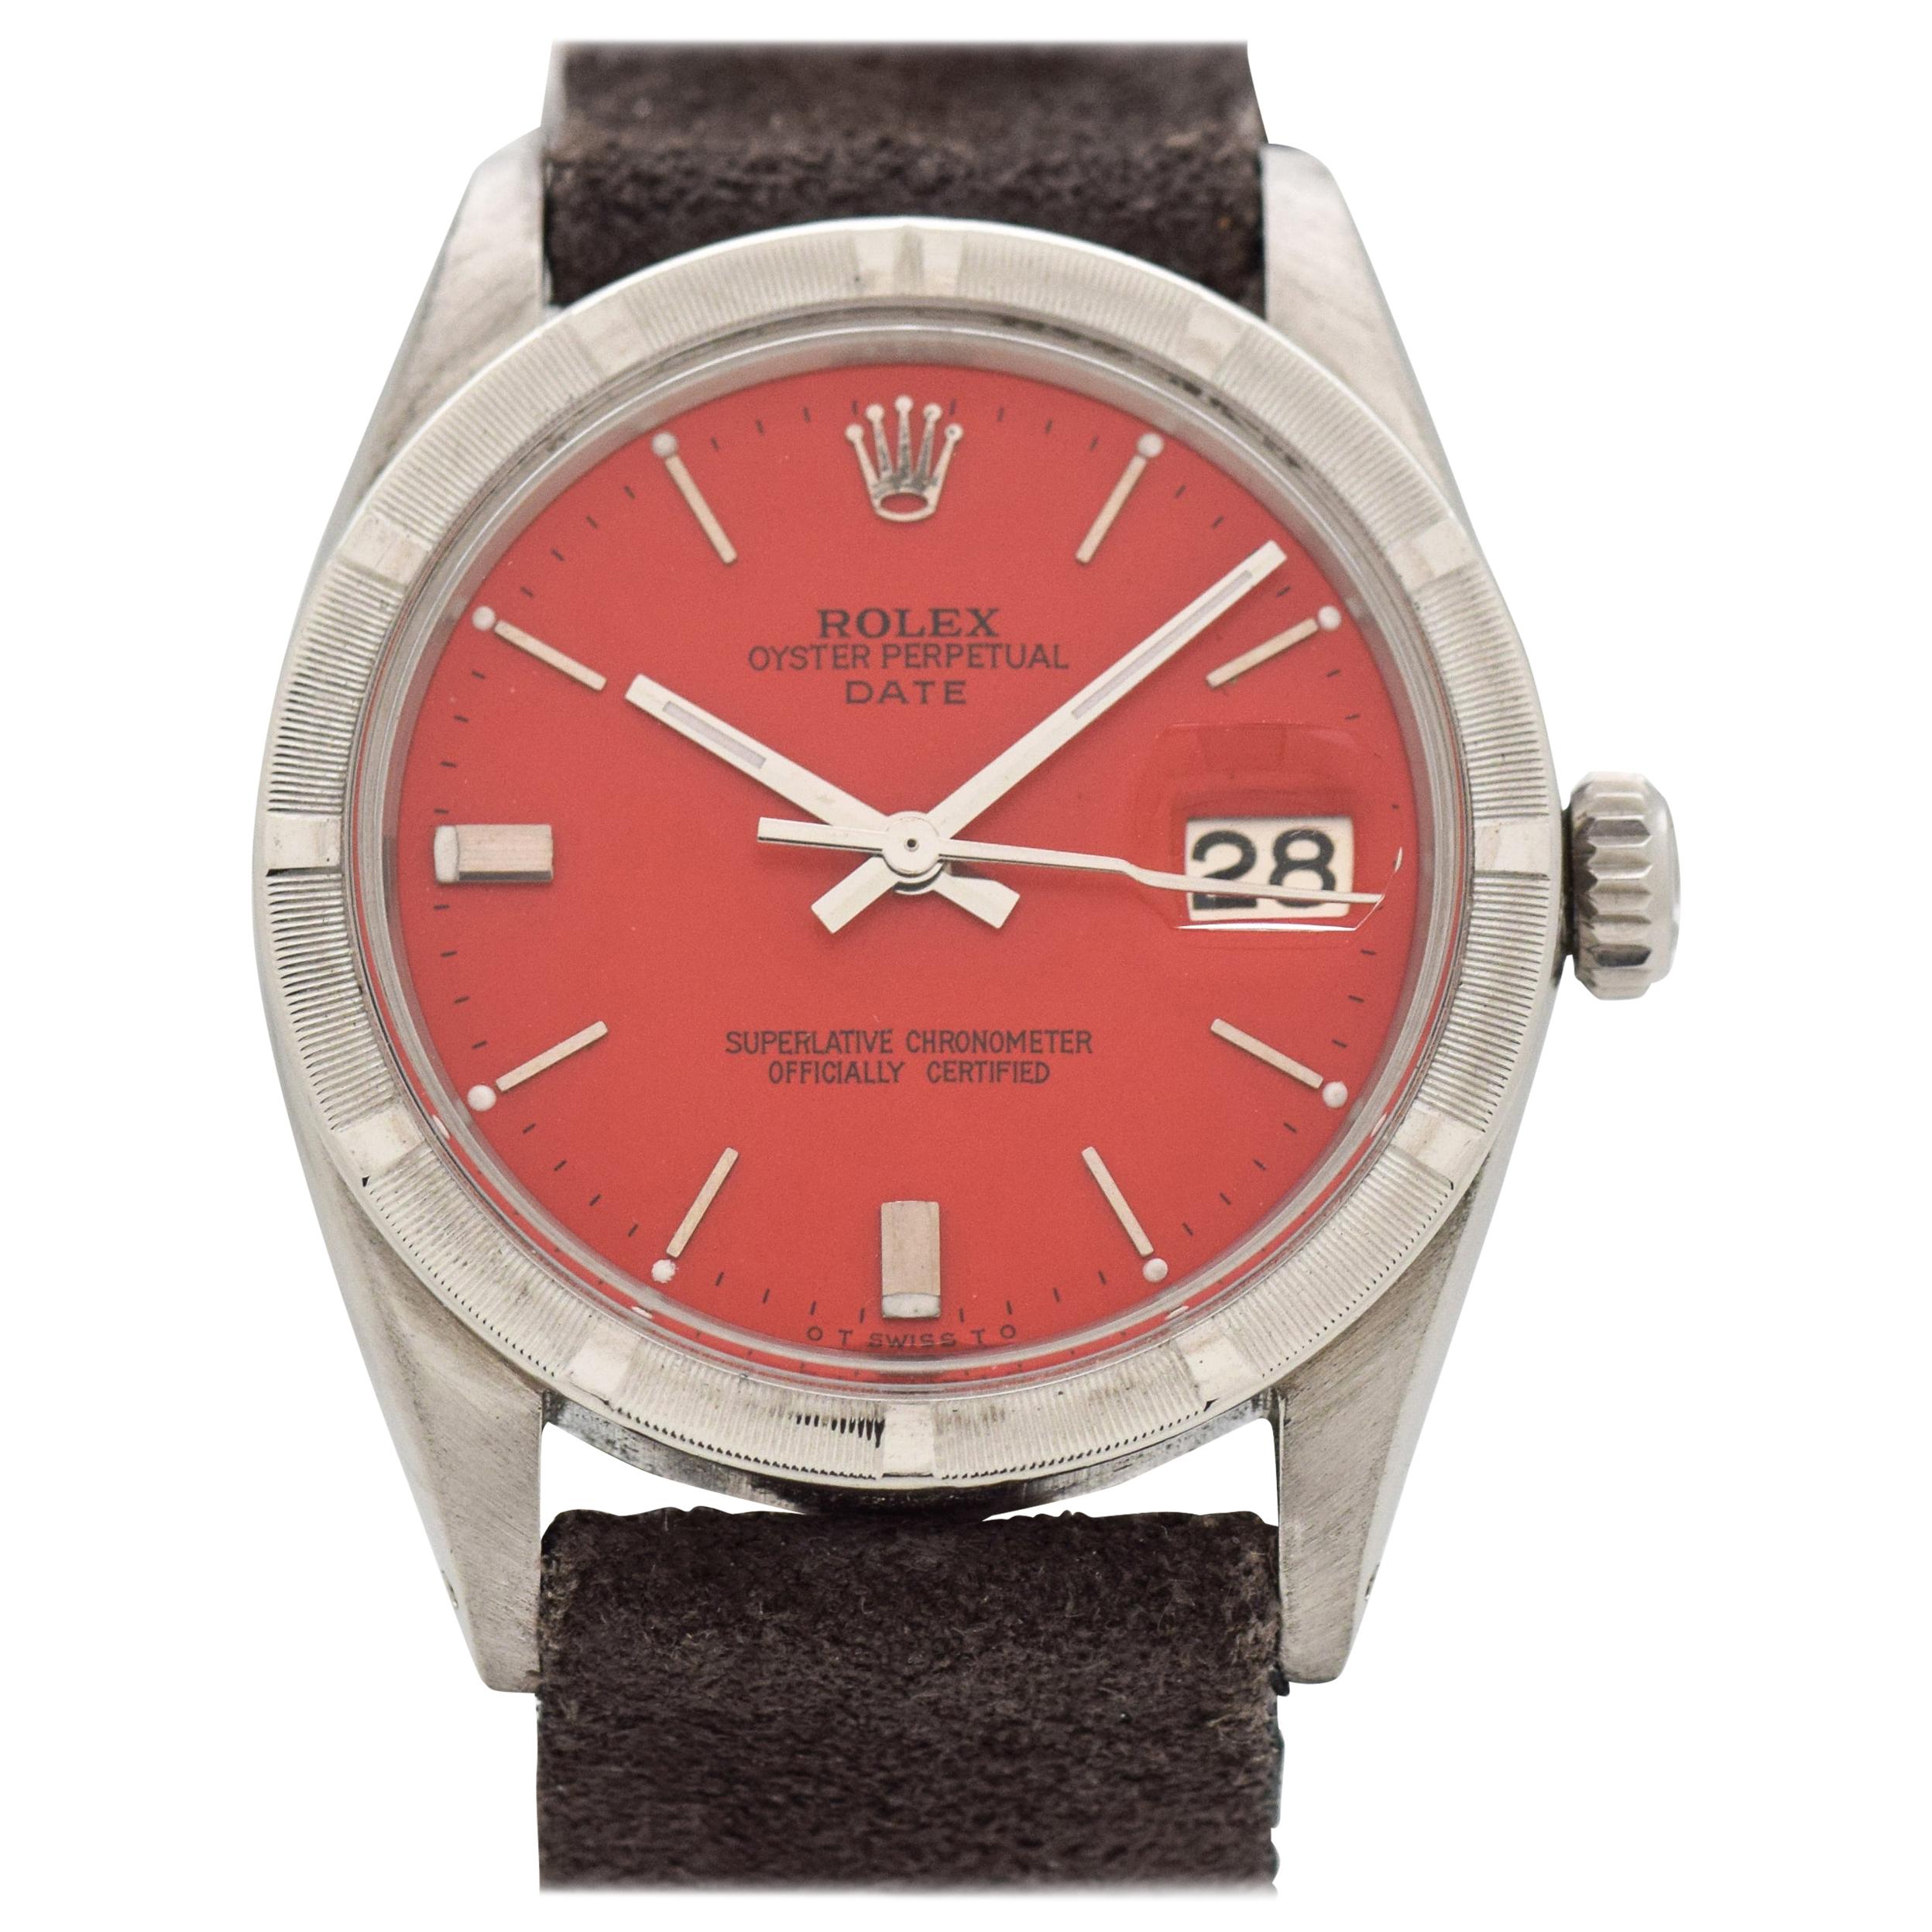 Vintage Rolex Date Automatic Watch with Custom Red Dial, 1964